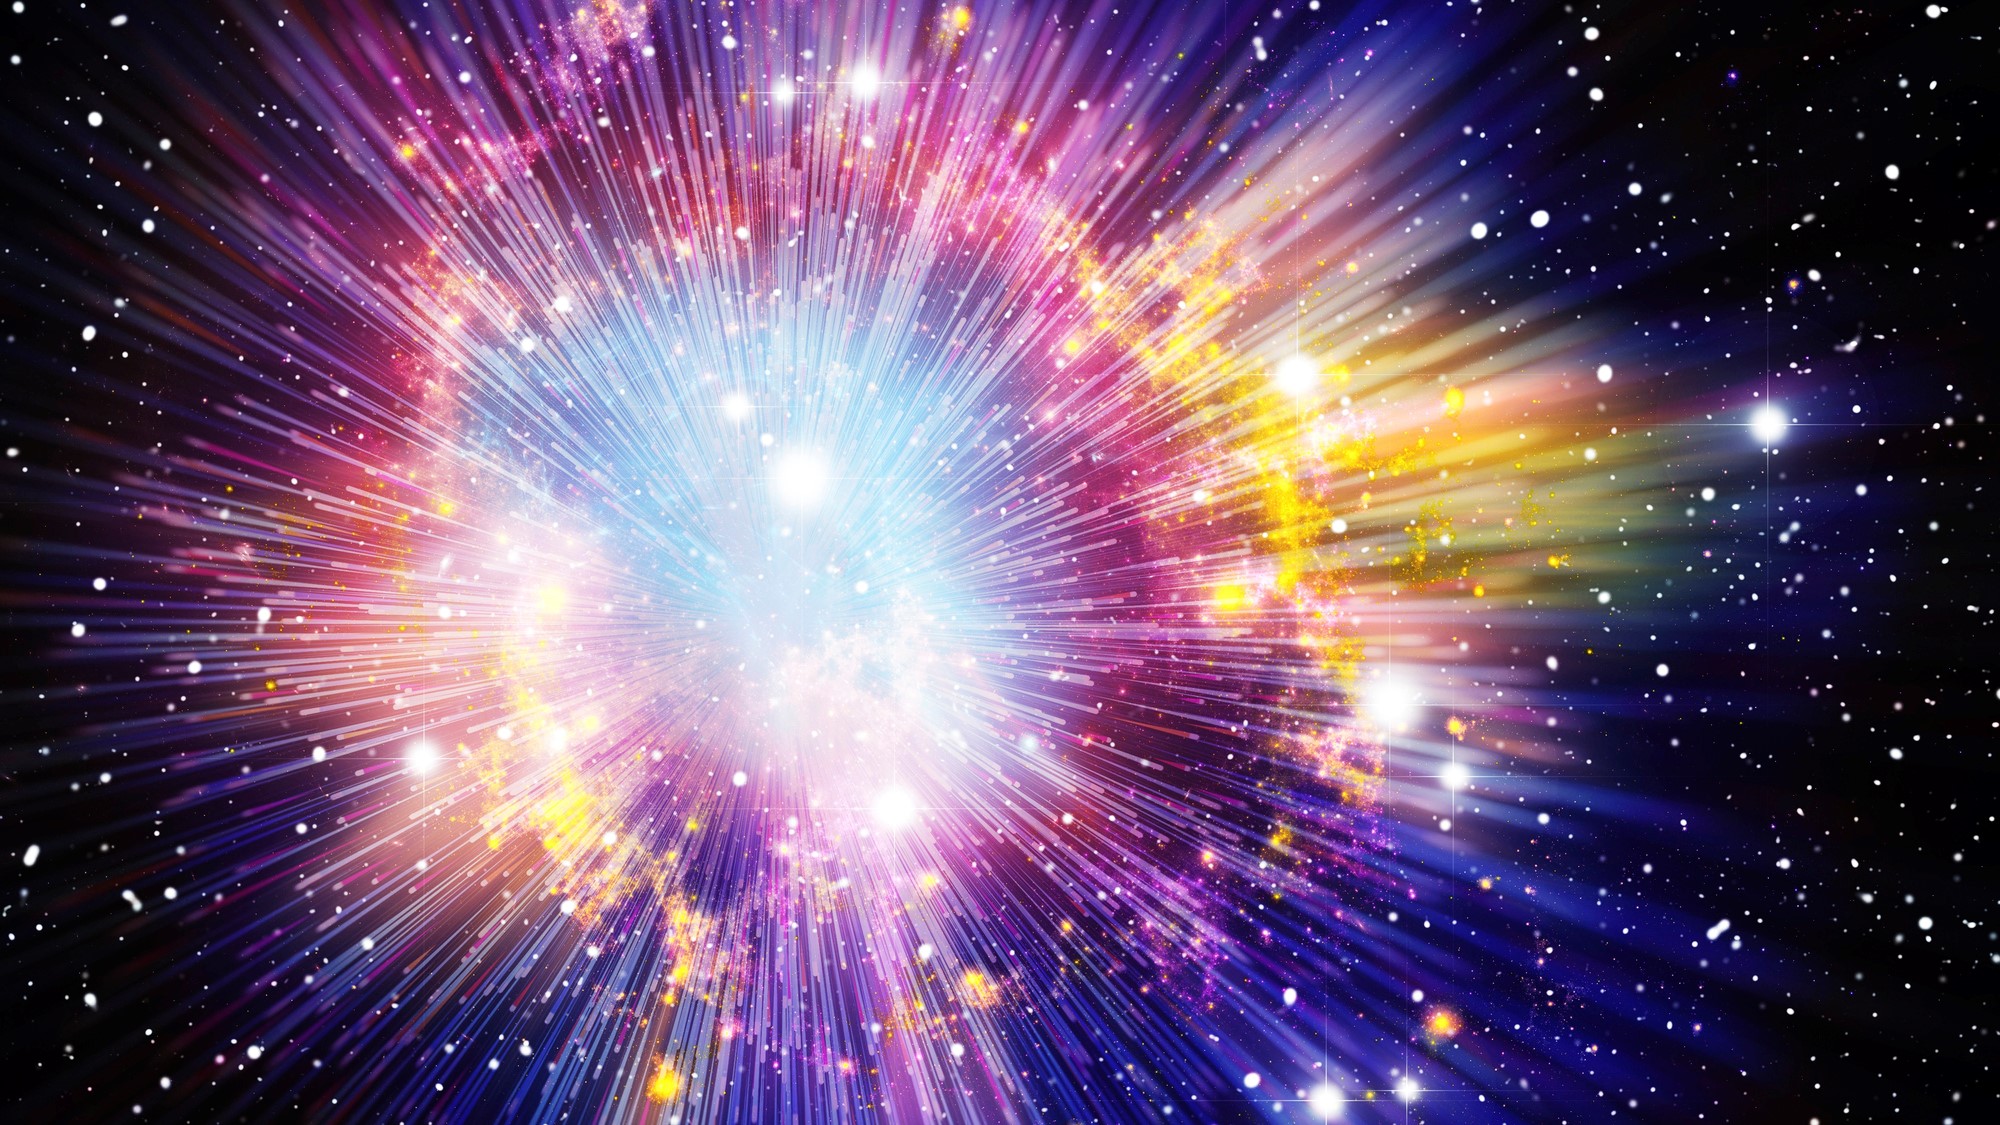 Graphic illustration of the Big Bang.  Purple, white and yellow light spreads out from the center of the image.